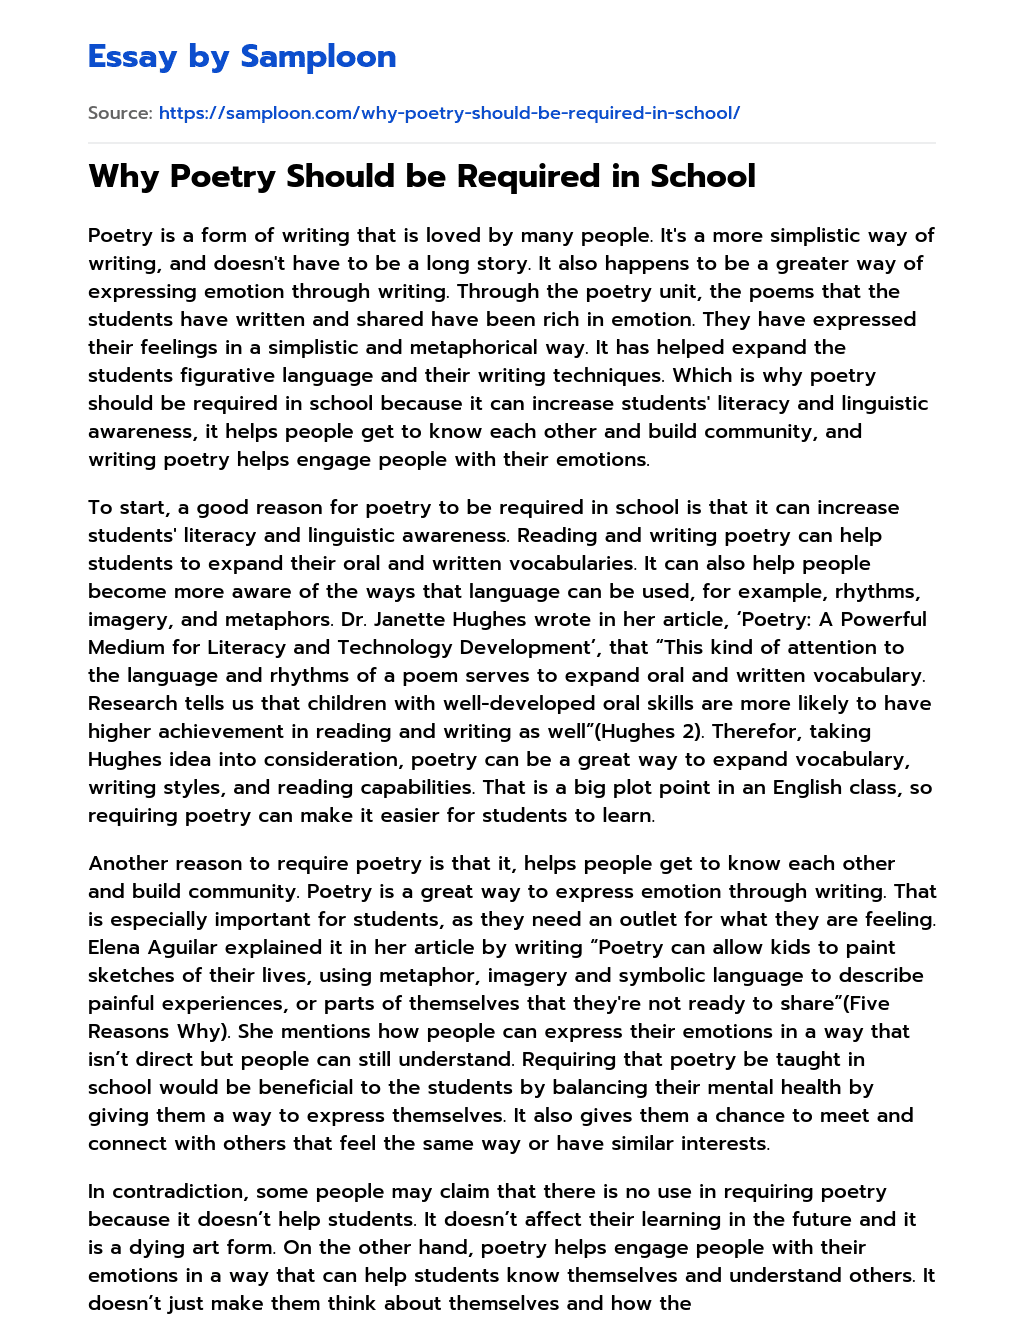 Why Poetry Should be Required in School essay